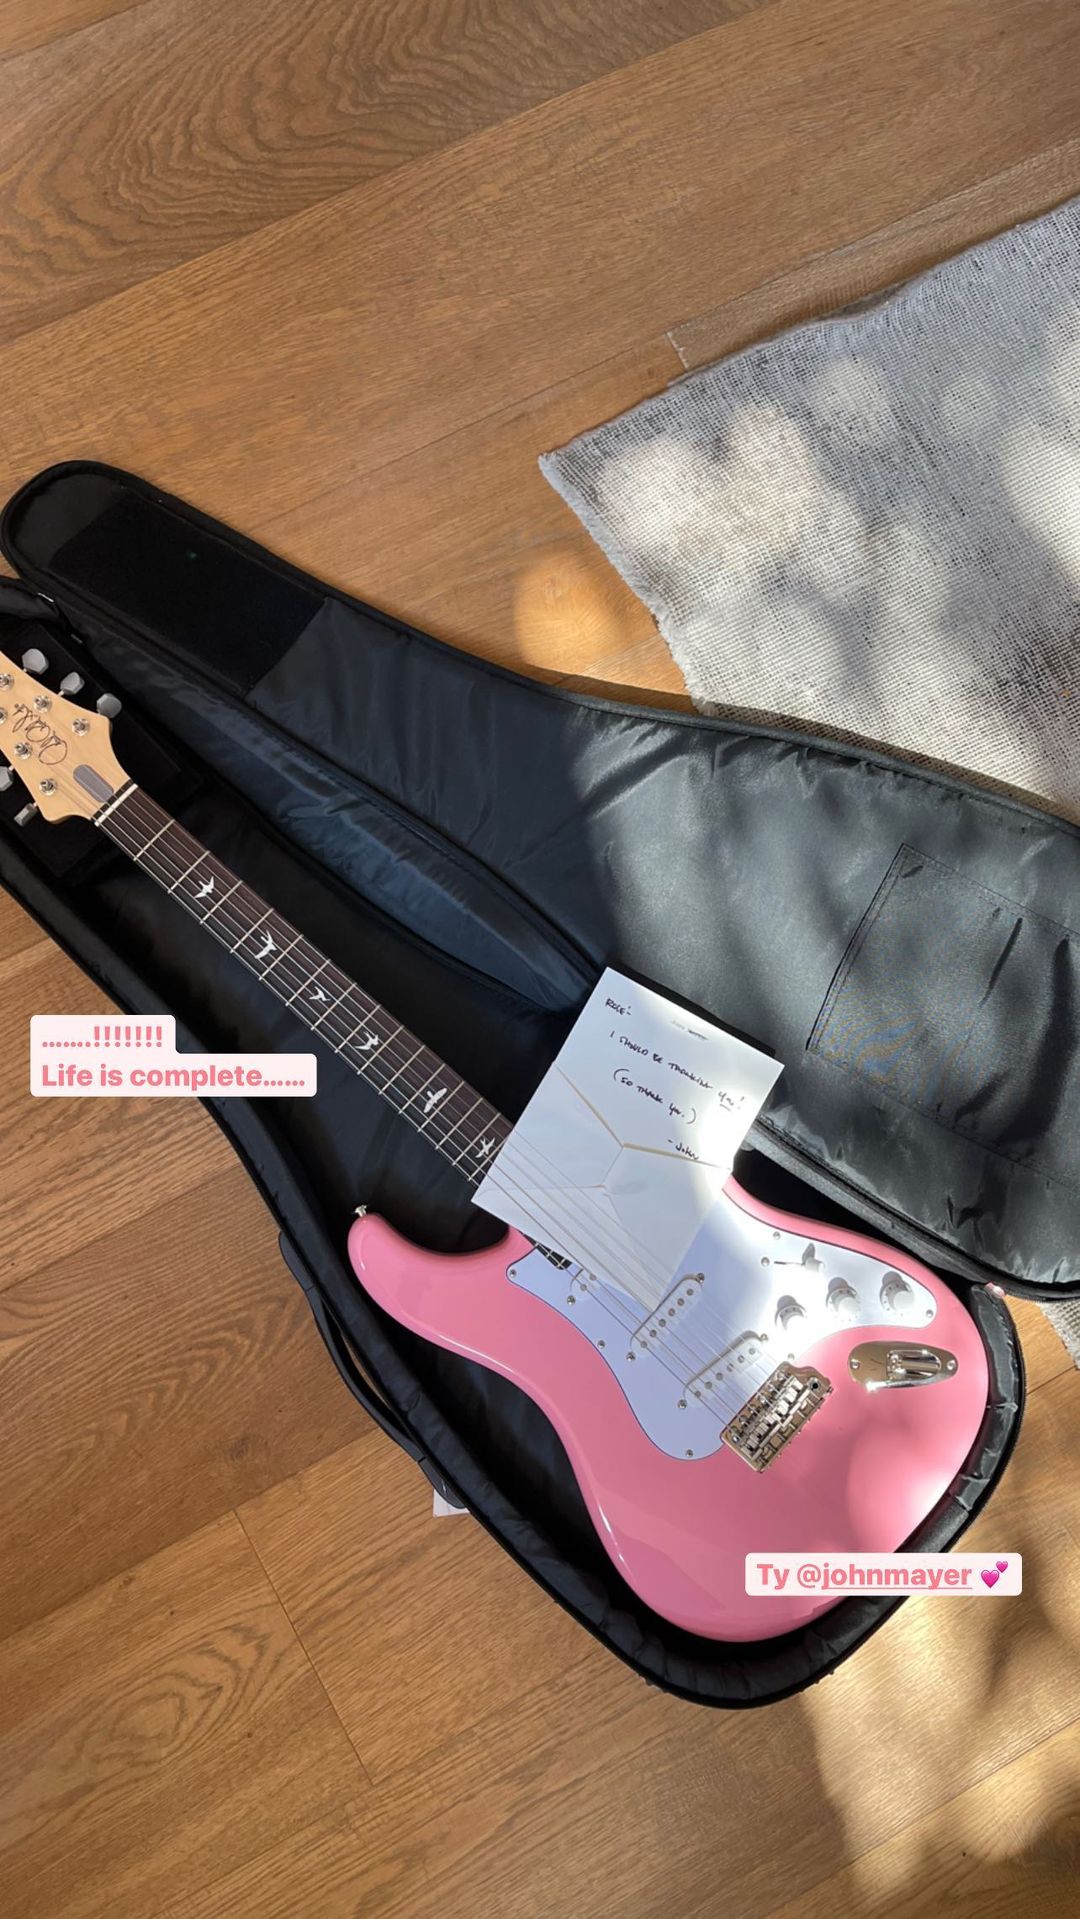 Rosé received a sweet gift from John Mayer